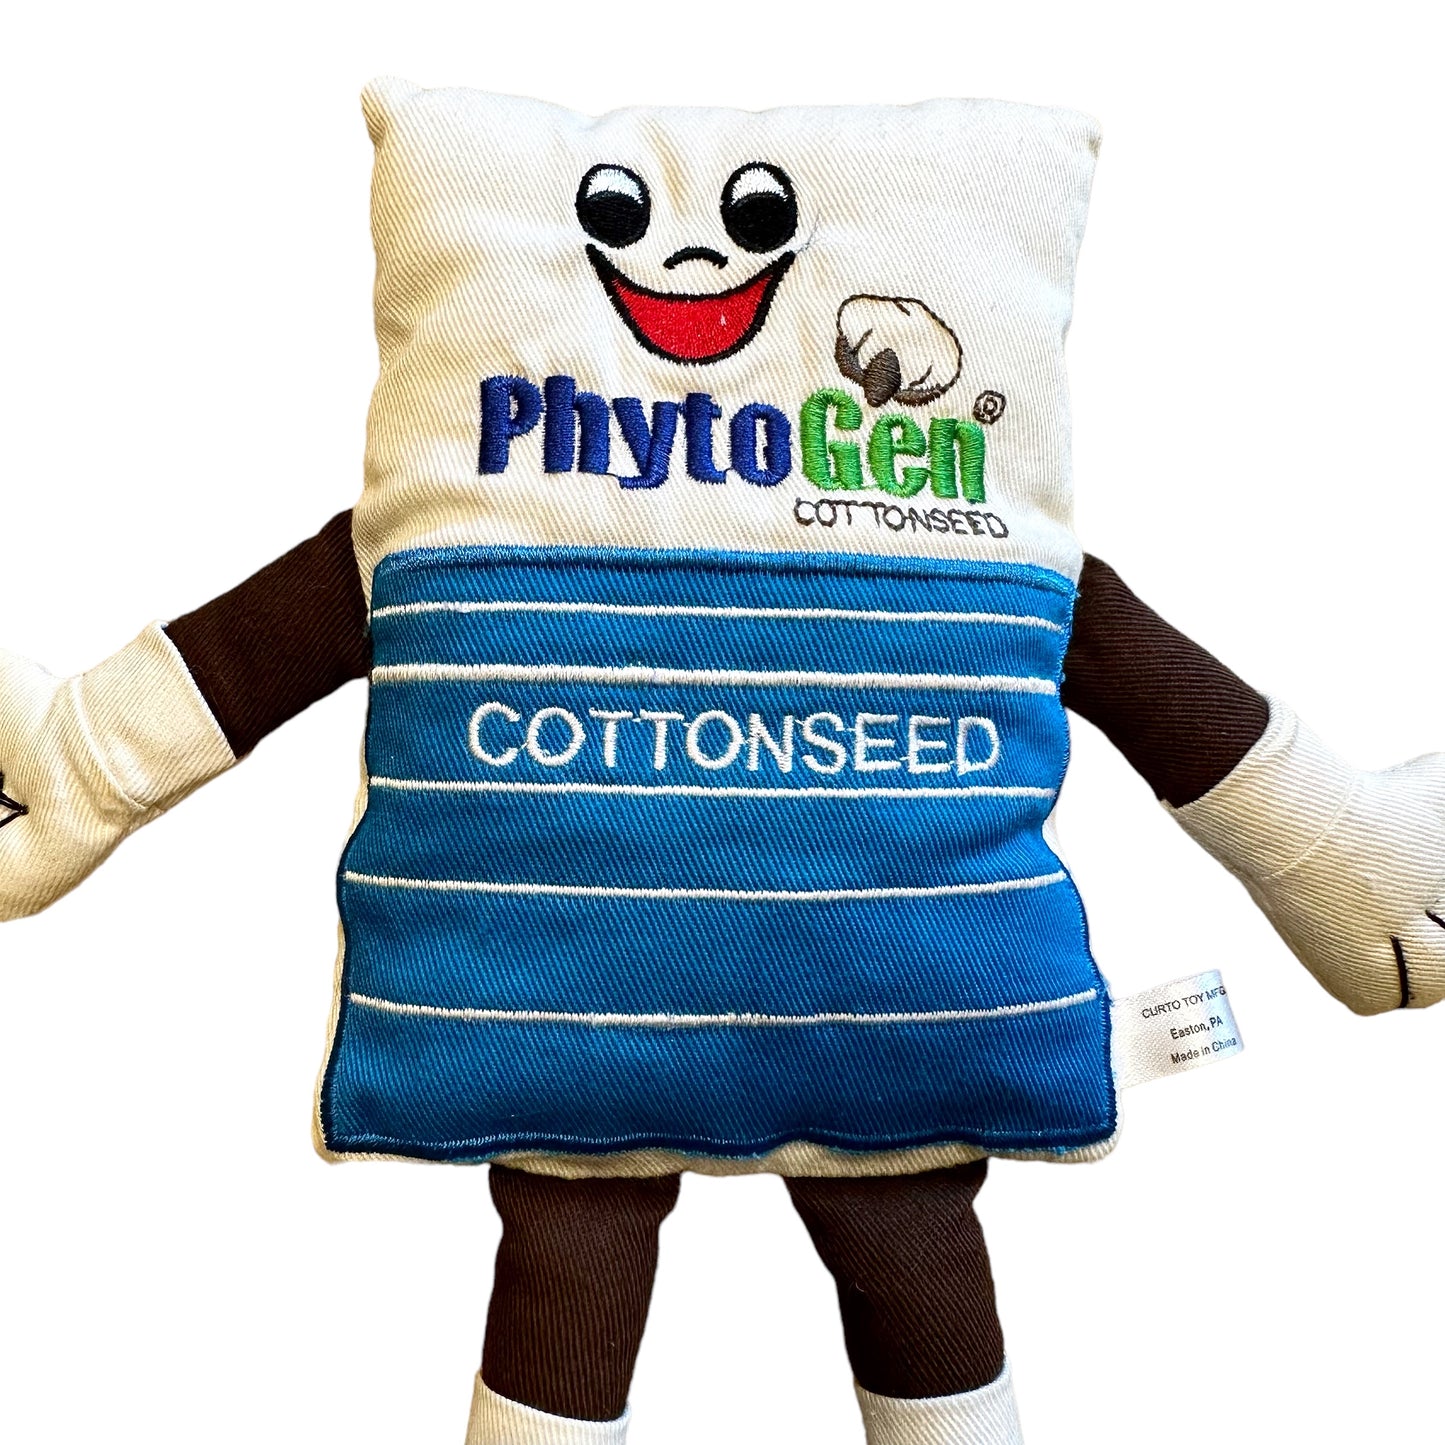 CURTO TOY phytogen cottonseed plush